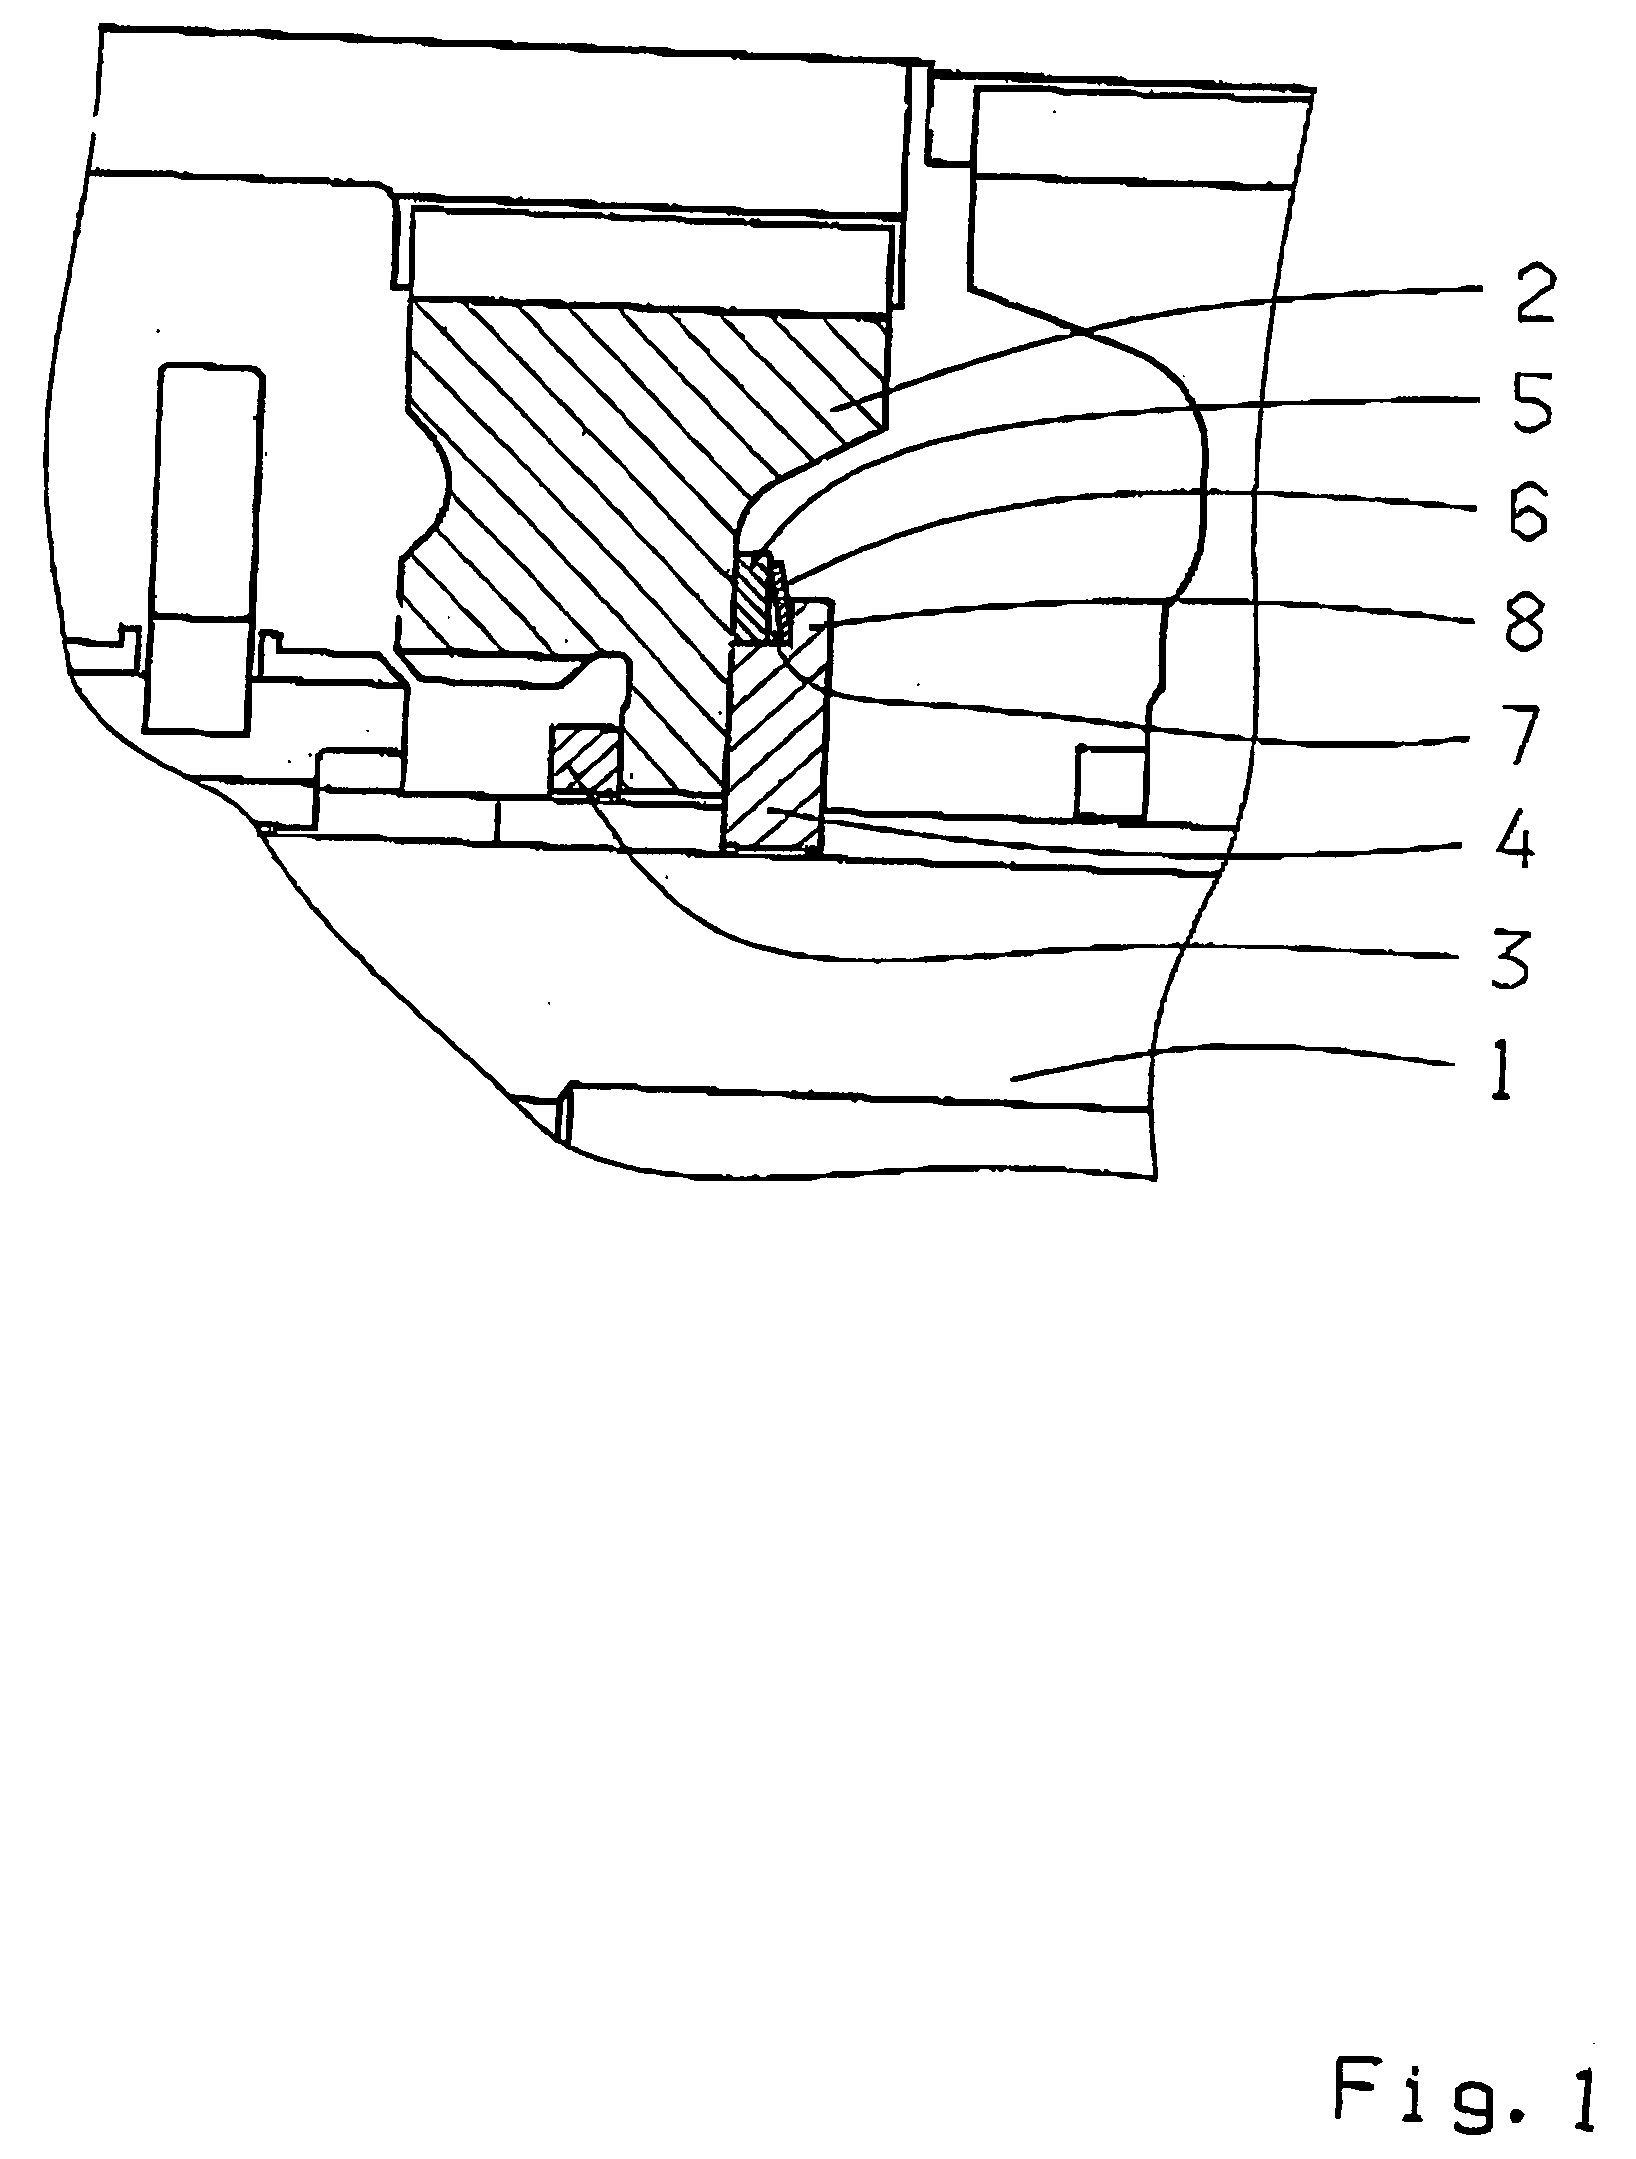 Device for reduction of axial movement of the main shaft gears in a transmission with at least two countershafts